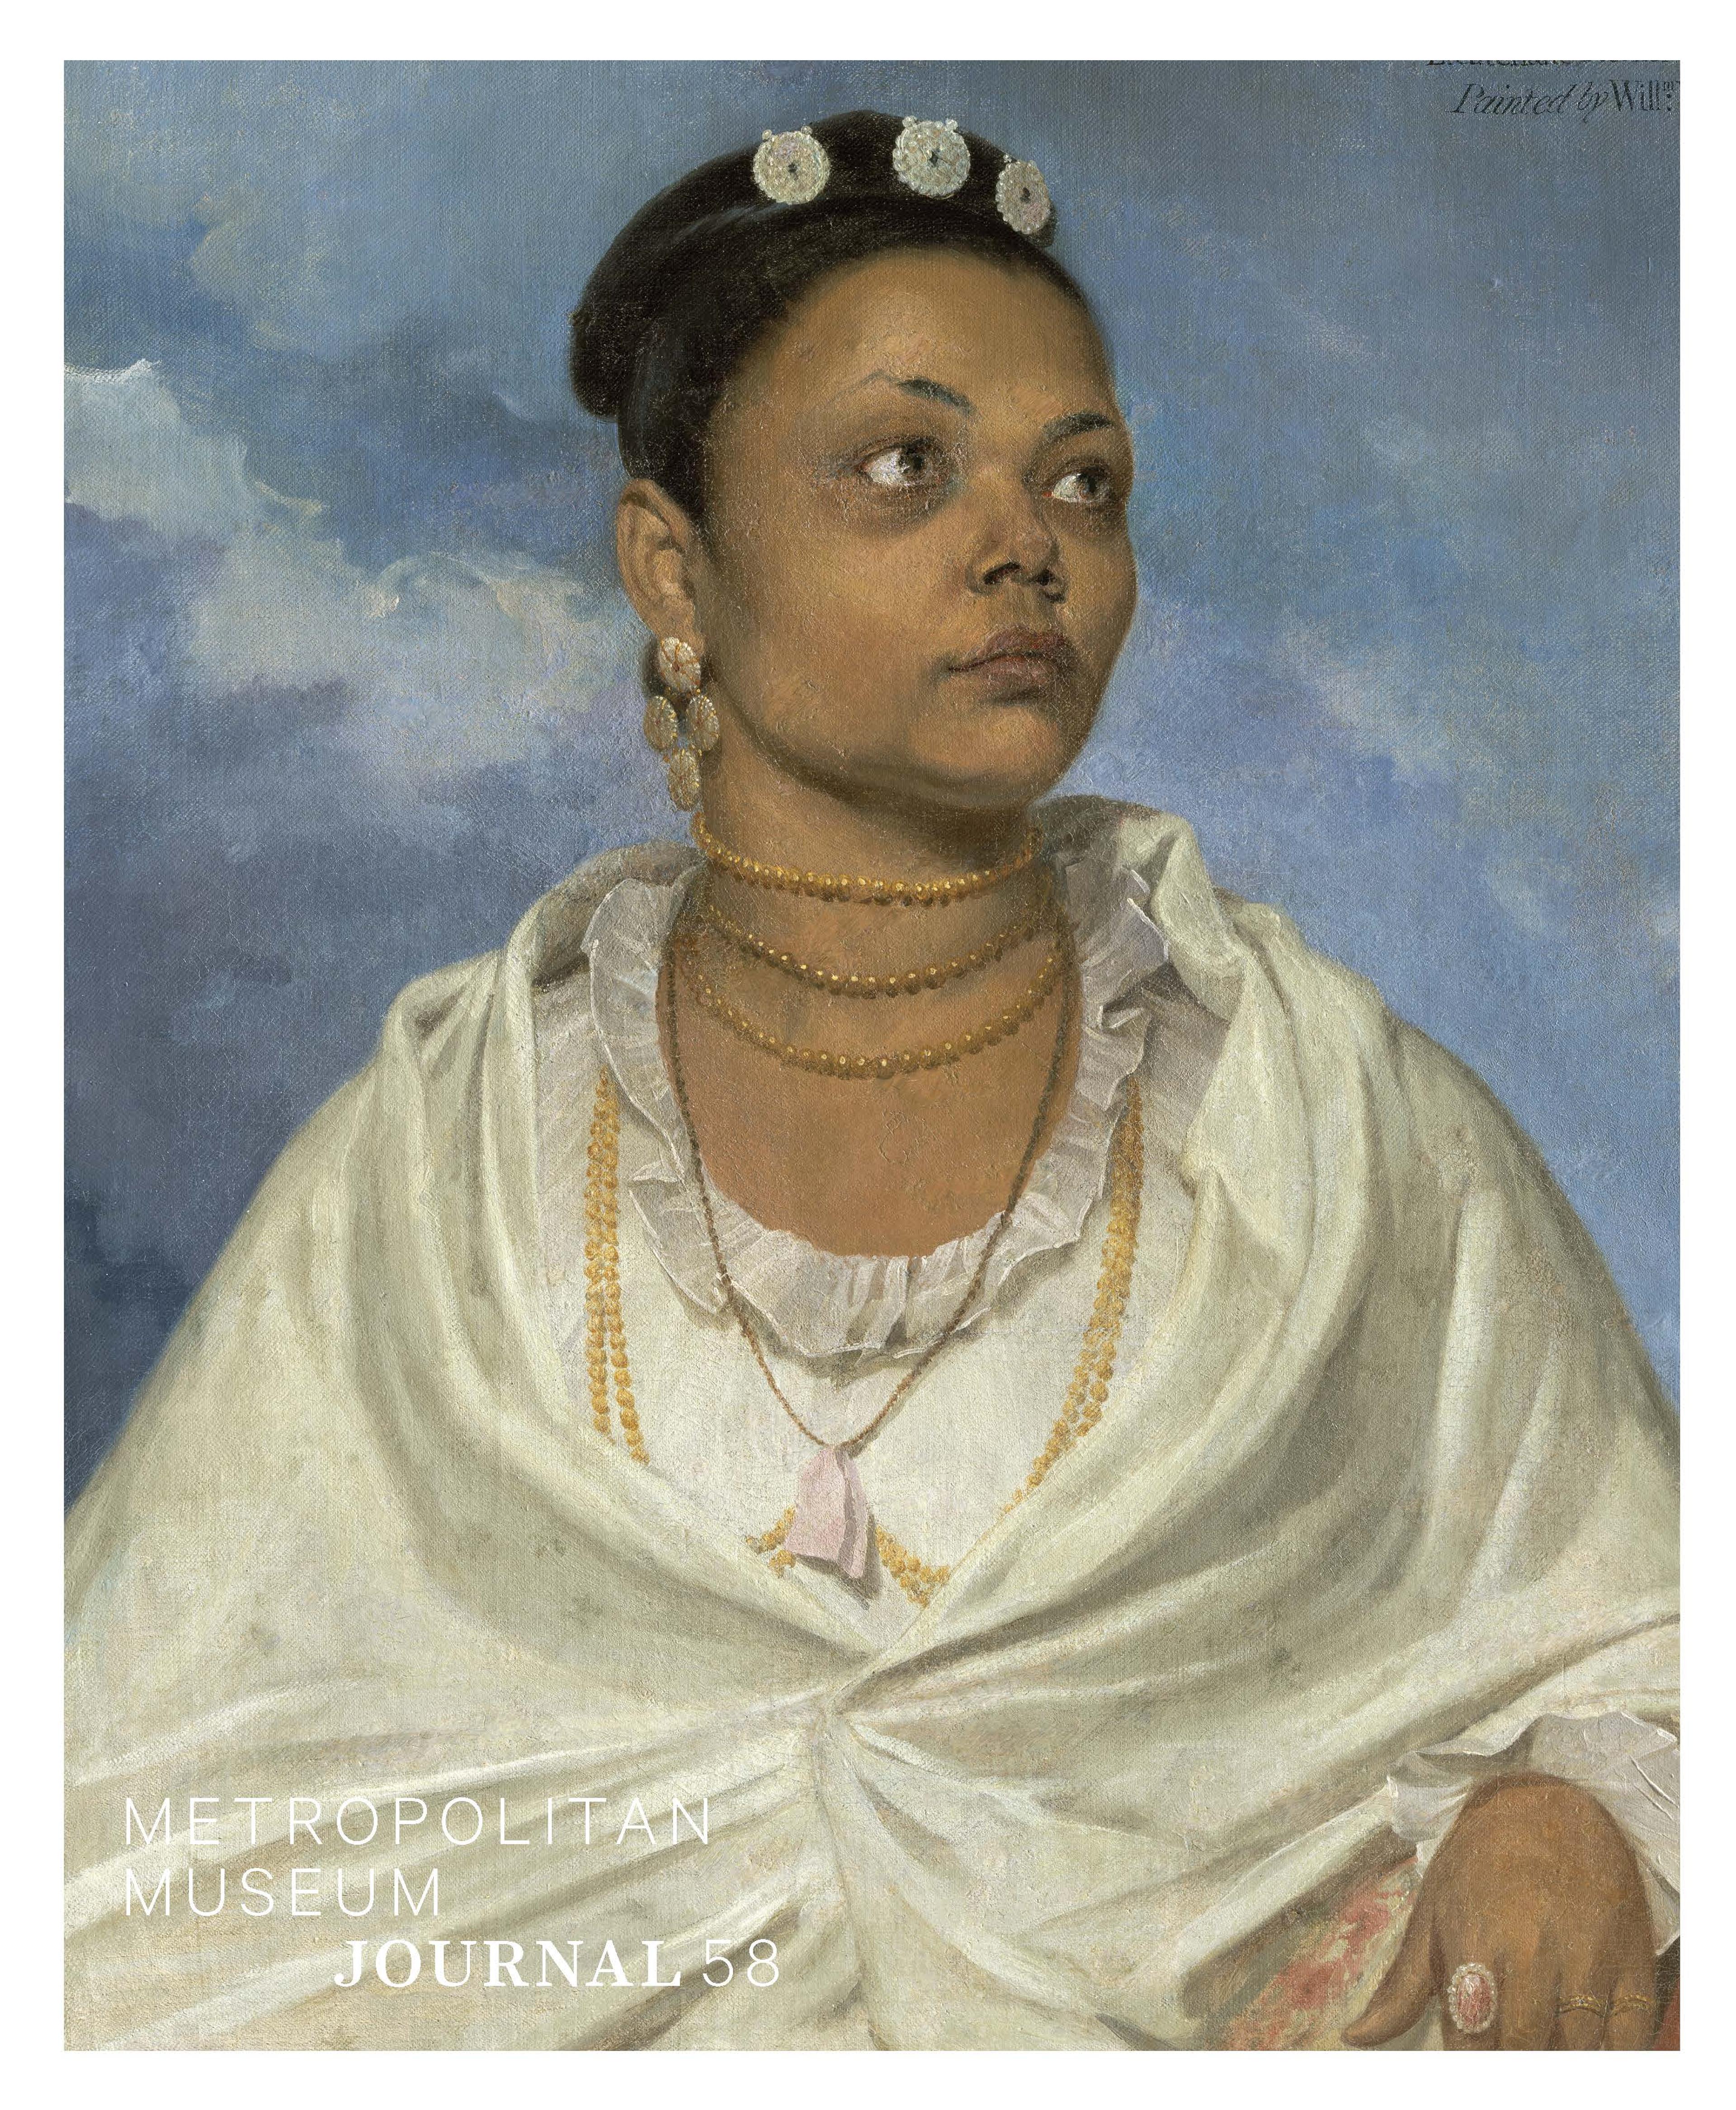 a portrait of a woman with medium skin tone, in a white robe and blouse with bead necklaces, against a cloudy sky, with writing in the upper right identifying her and the artist